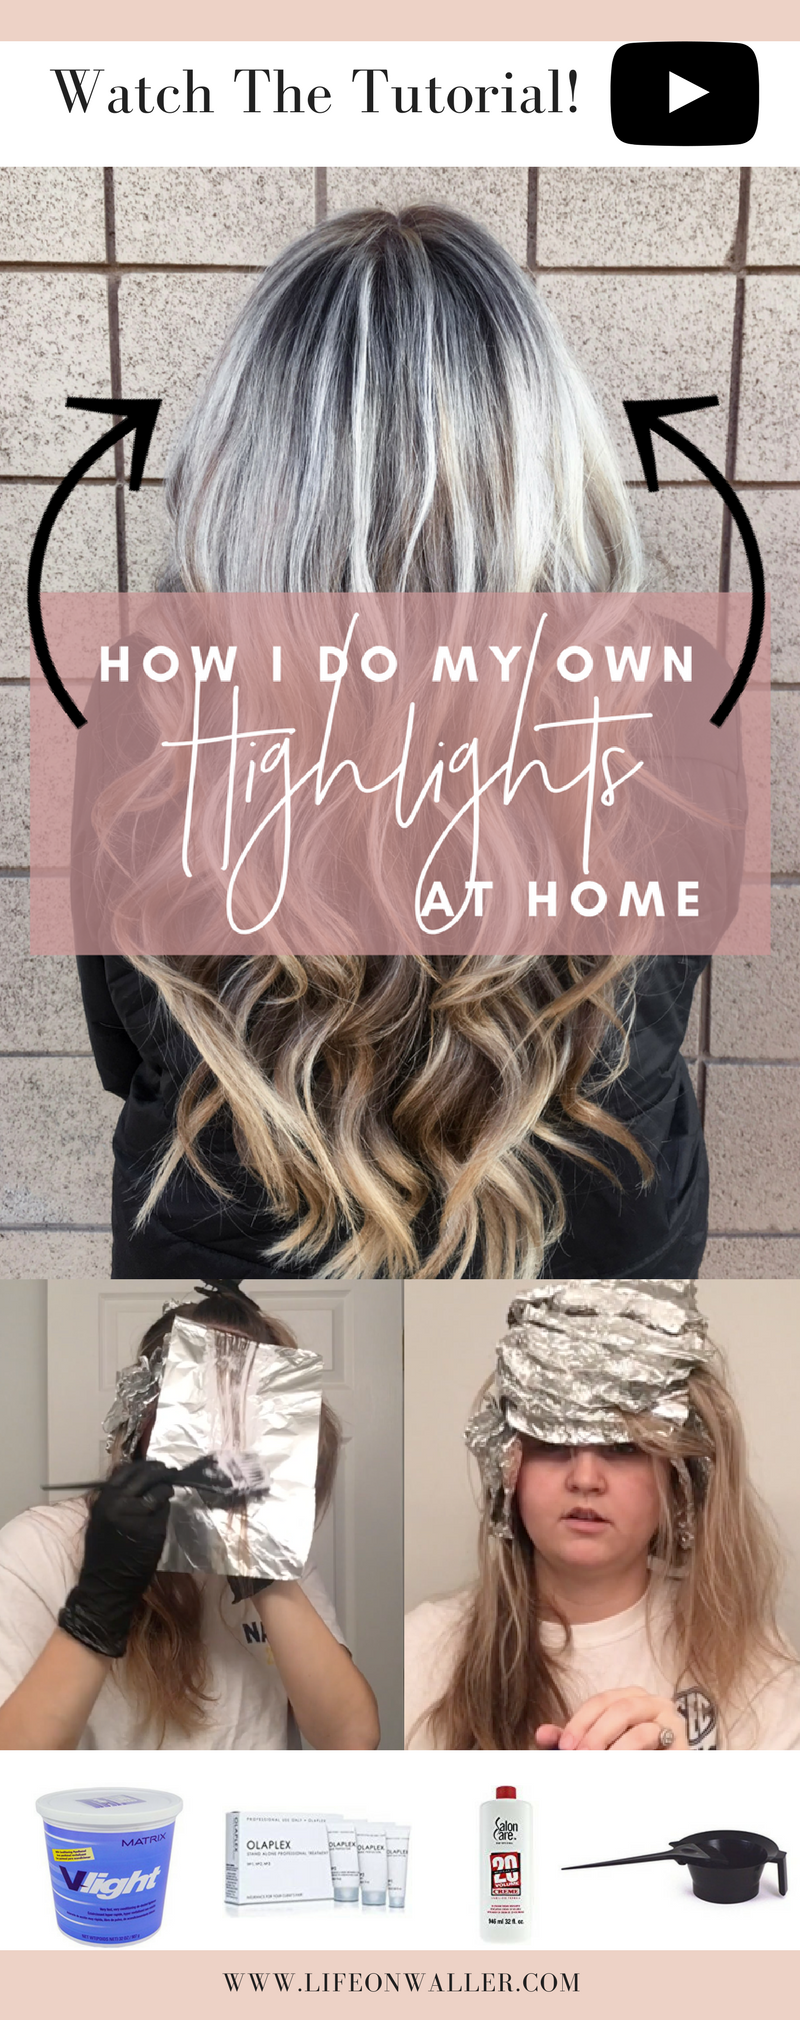 How To Do Your Own Highlights at Home -   16 hair Highlights at home ideas